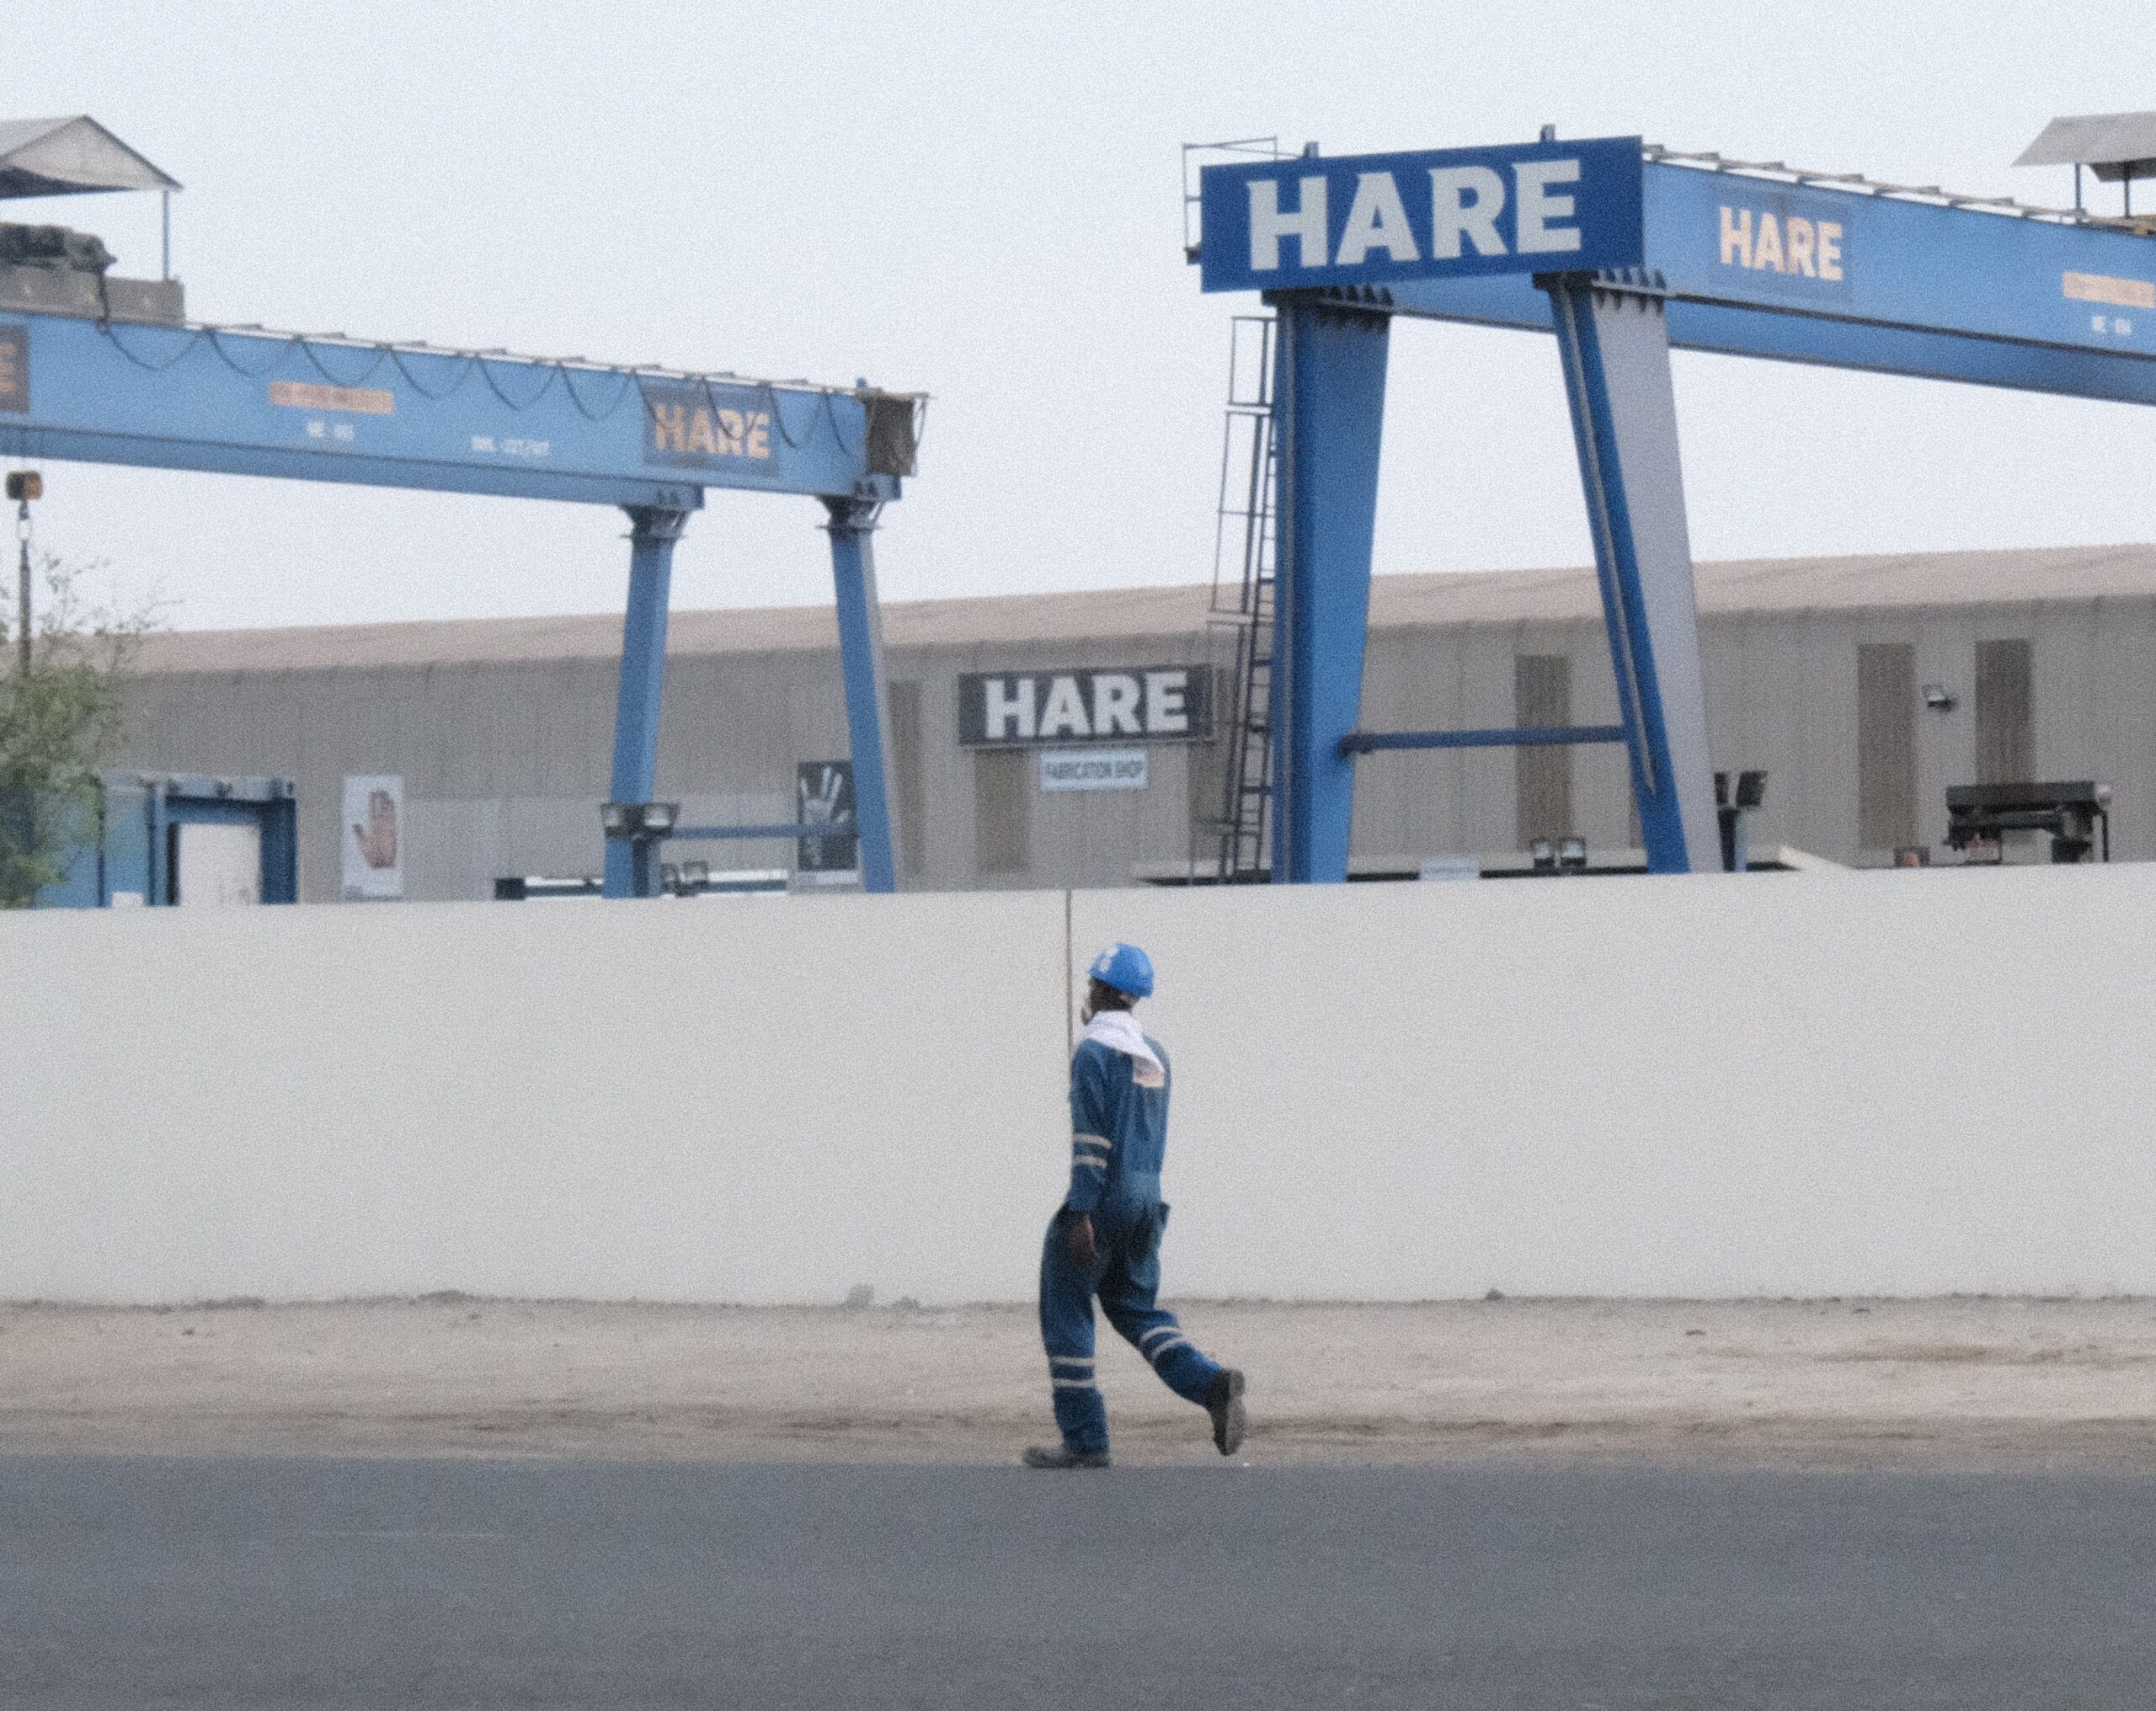 An Adnoc worker walking by an oil and gas project